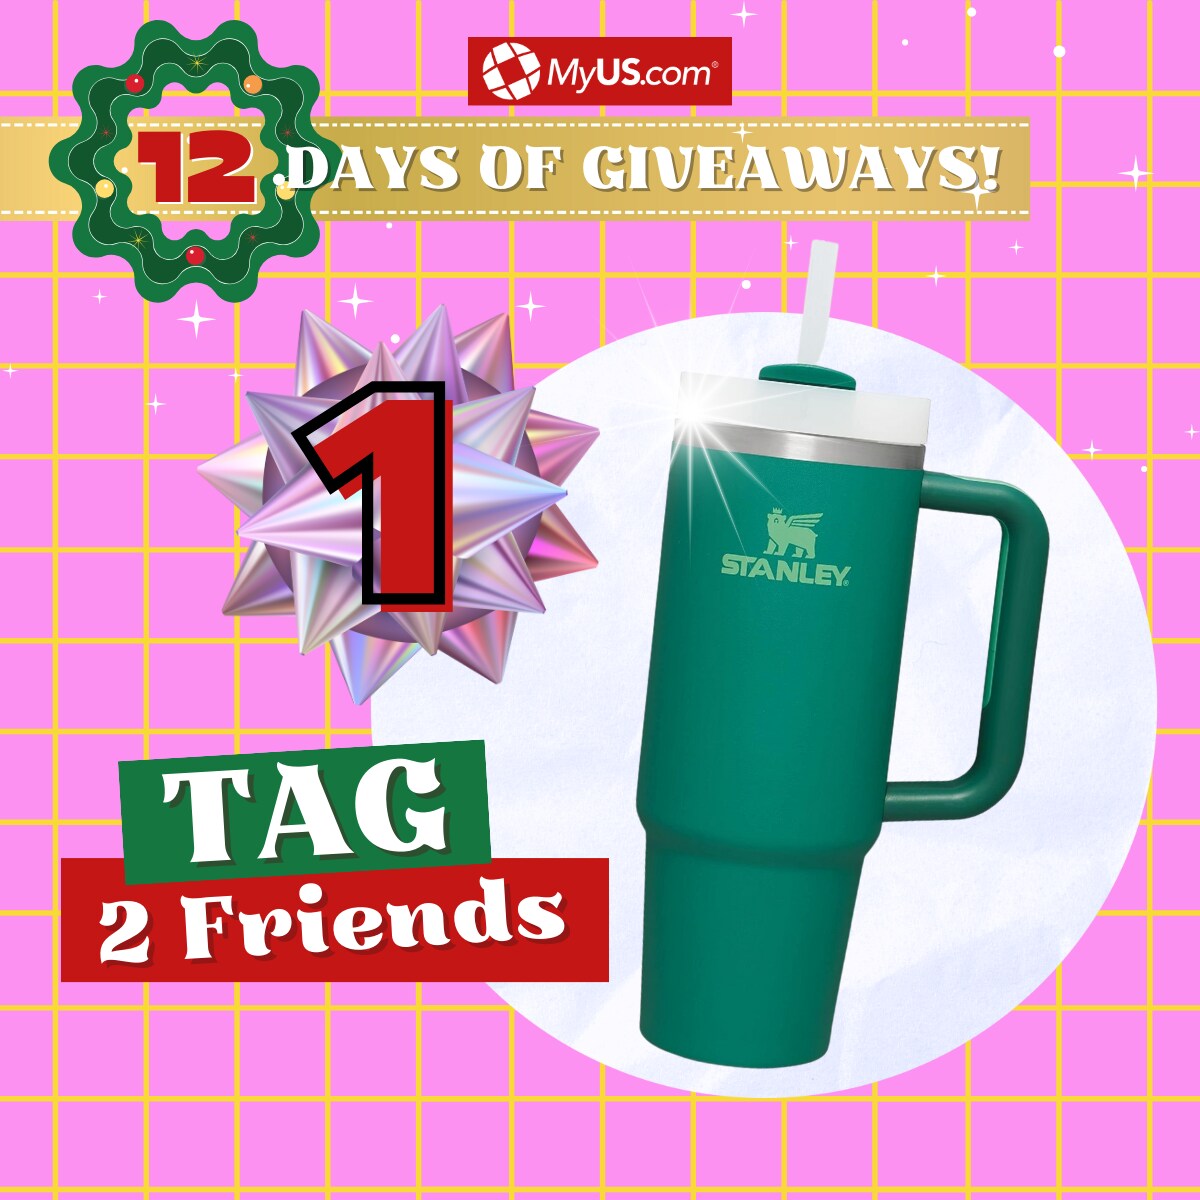 Tag 2 Friend to win a Stanley Travel Mug